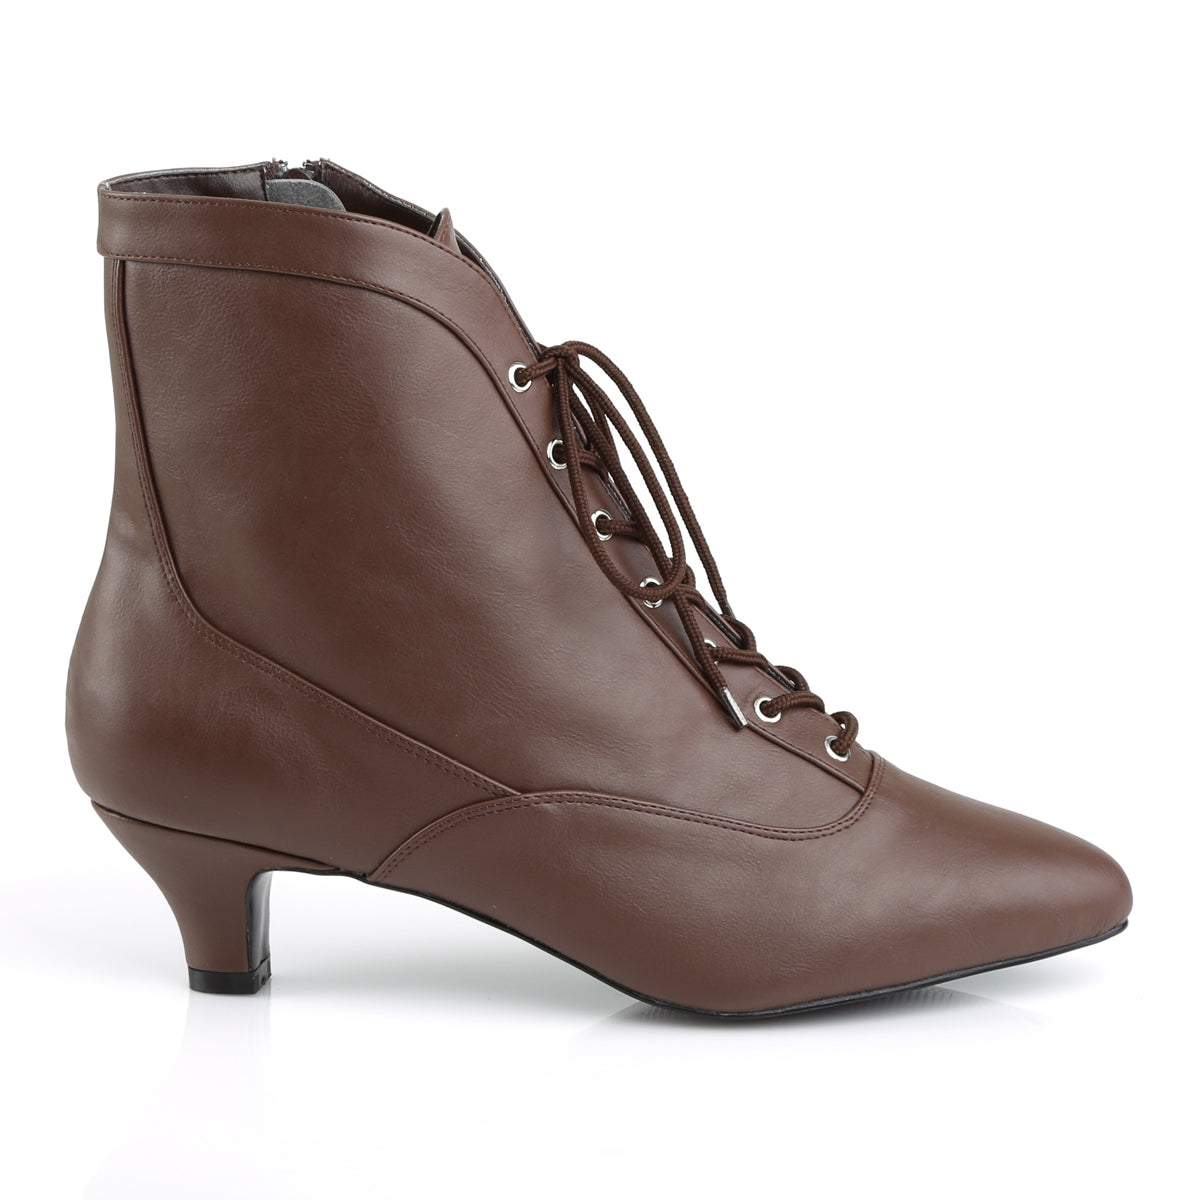 FAB-1005 Ankle Boots